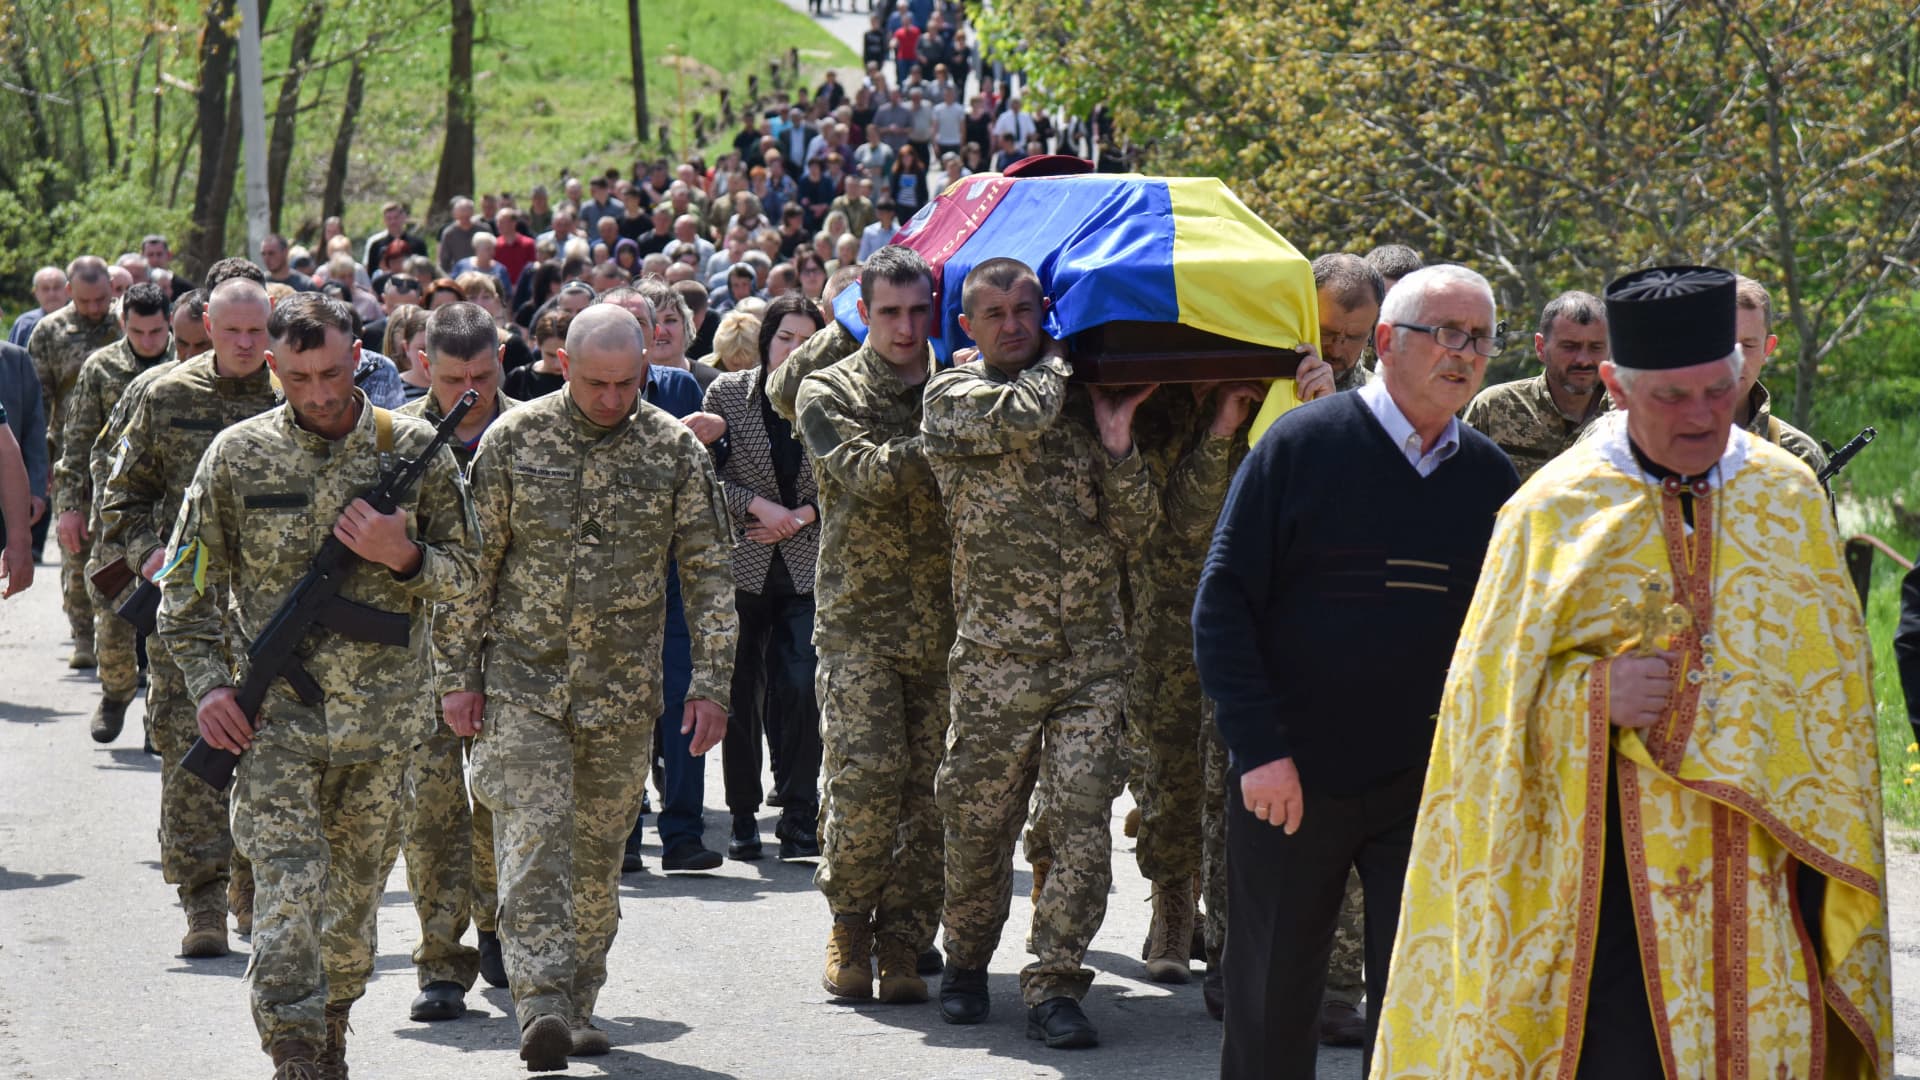 Soldiers carry a coffin of senior soldier Petro Sarakulo in the village of Kulchytsia, Lviv region. The funeral of senior soldier Petro Sarakulo is held in his native village of Kulchytsi, Lviv region. Due to the Russian military invasion of Ukraine on February 24, 2022, he went to serve in the Armed Forces of Ukraine.